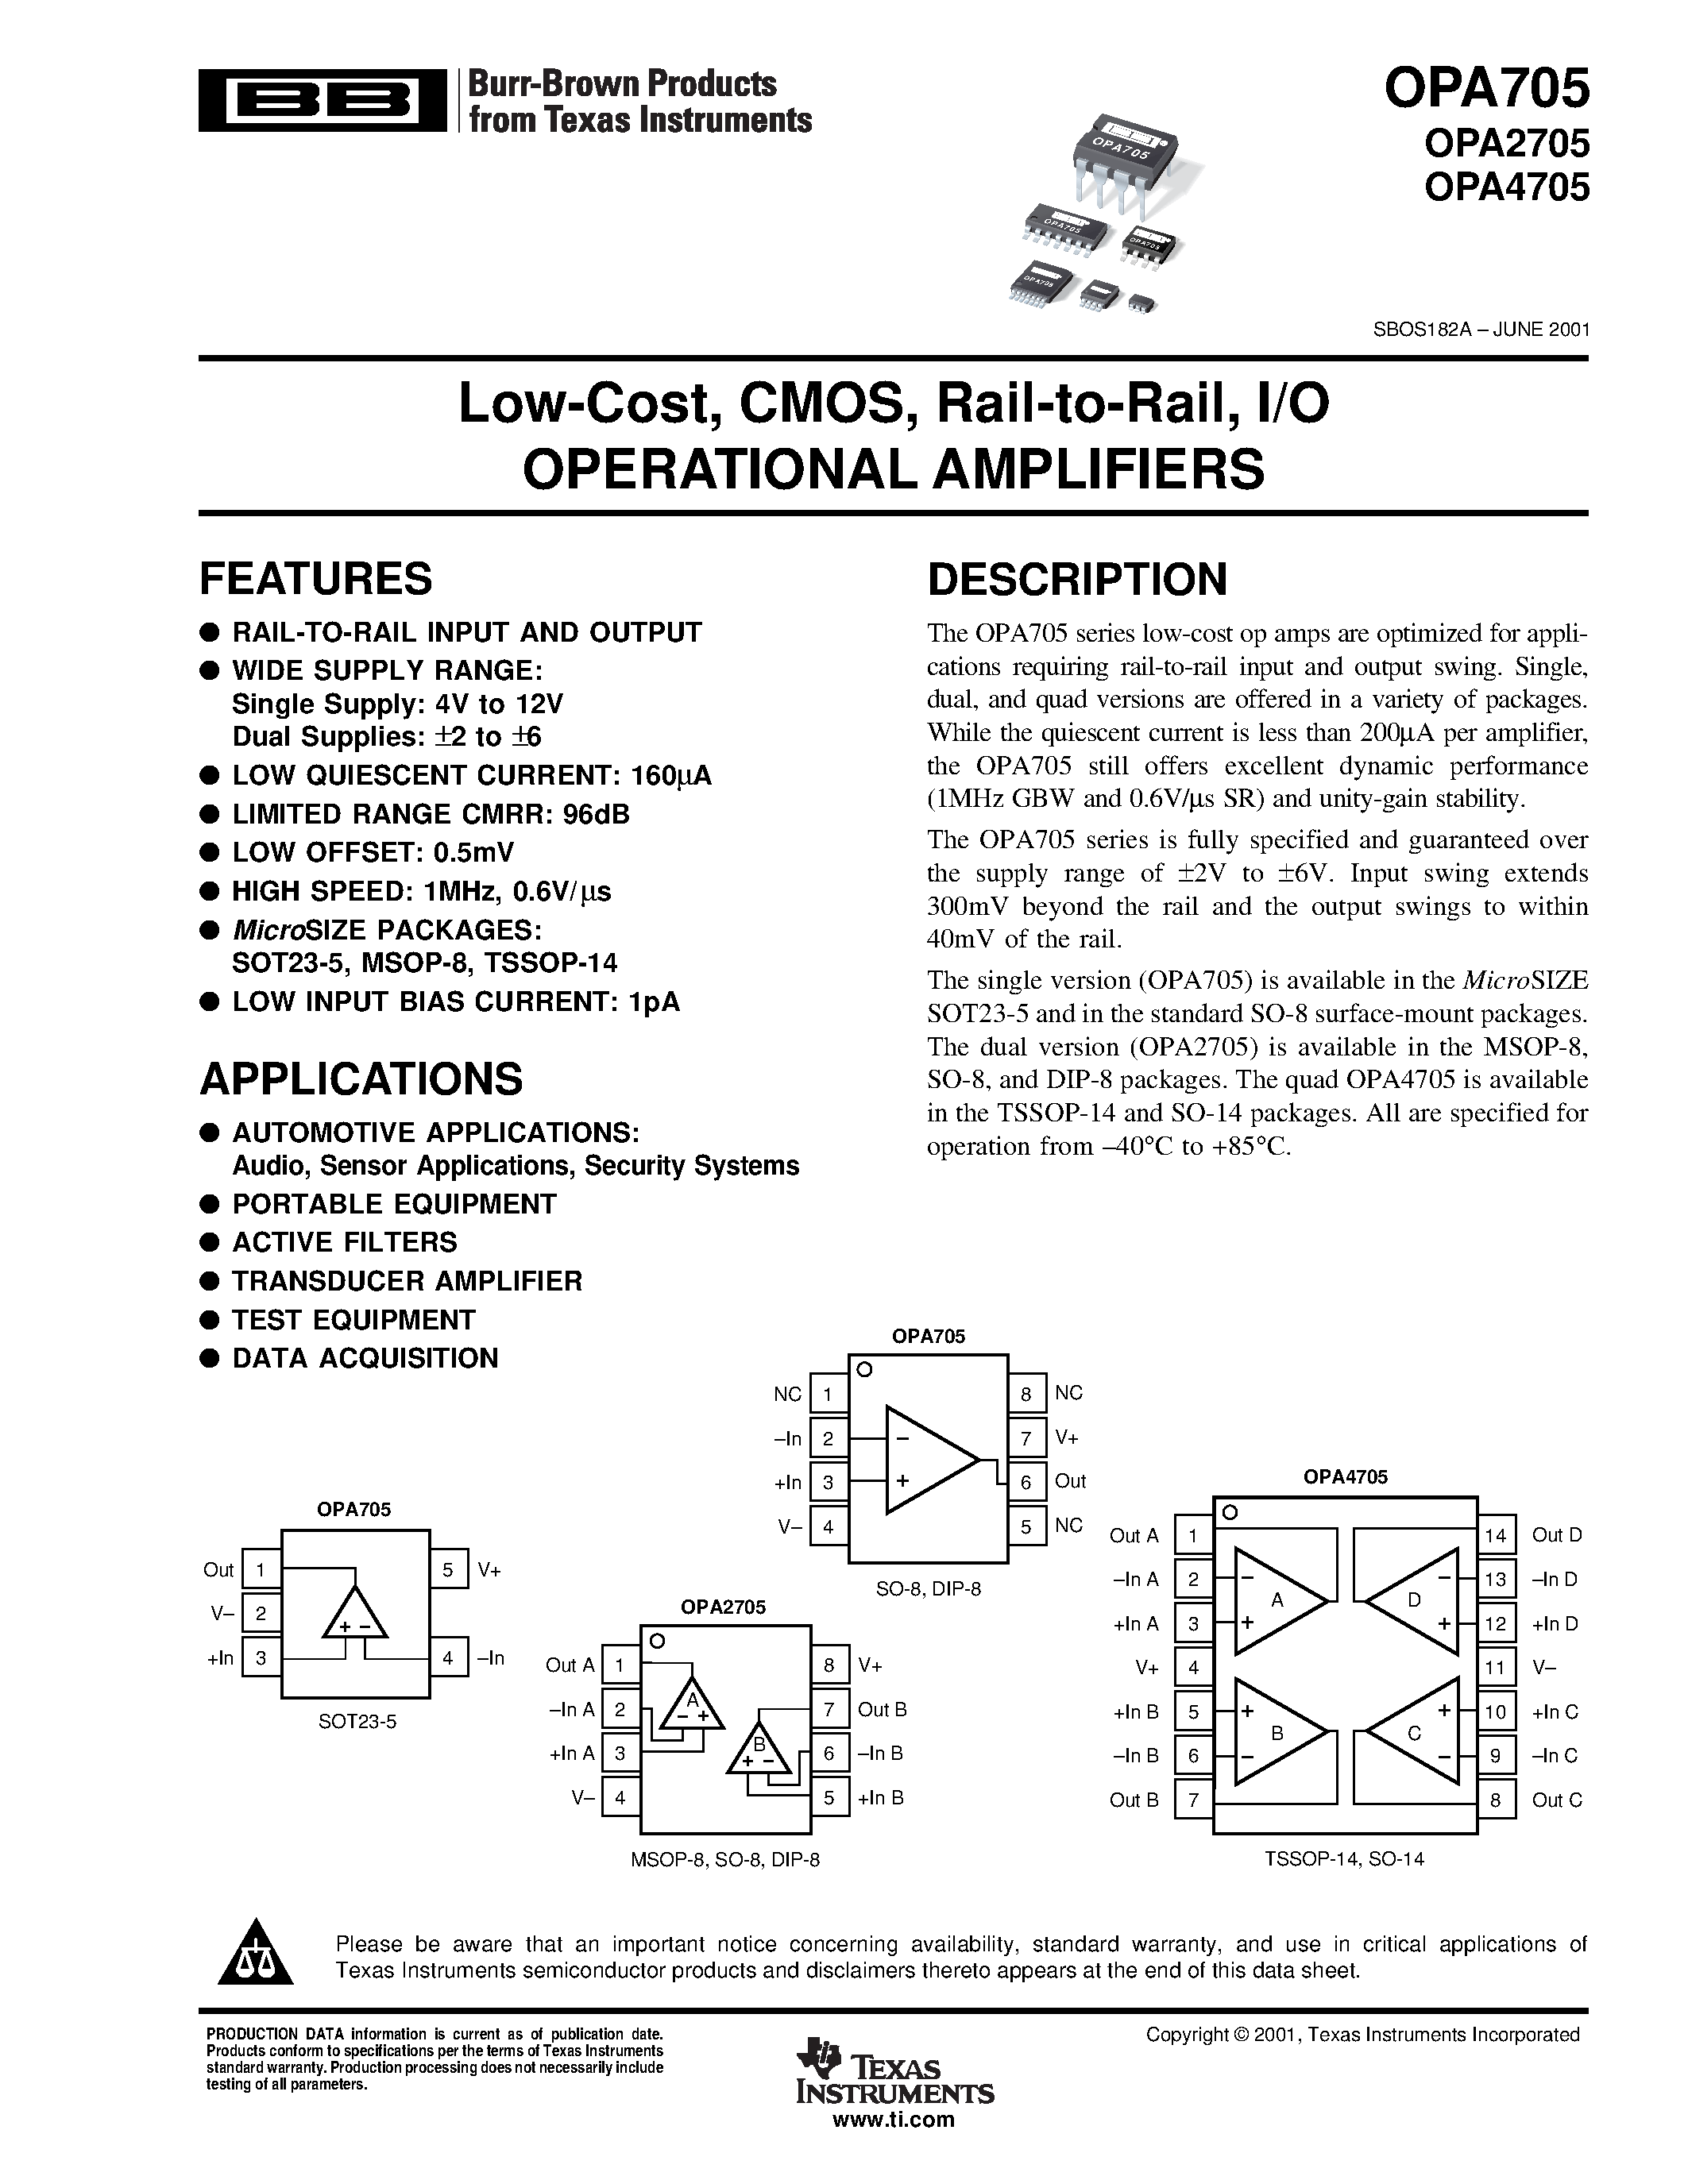 Datasheet OPA705 - Low-Cost / CMOS / Rail-to-Rail / I/O OPERATIONAL AMPLIFIERS page 1